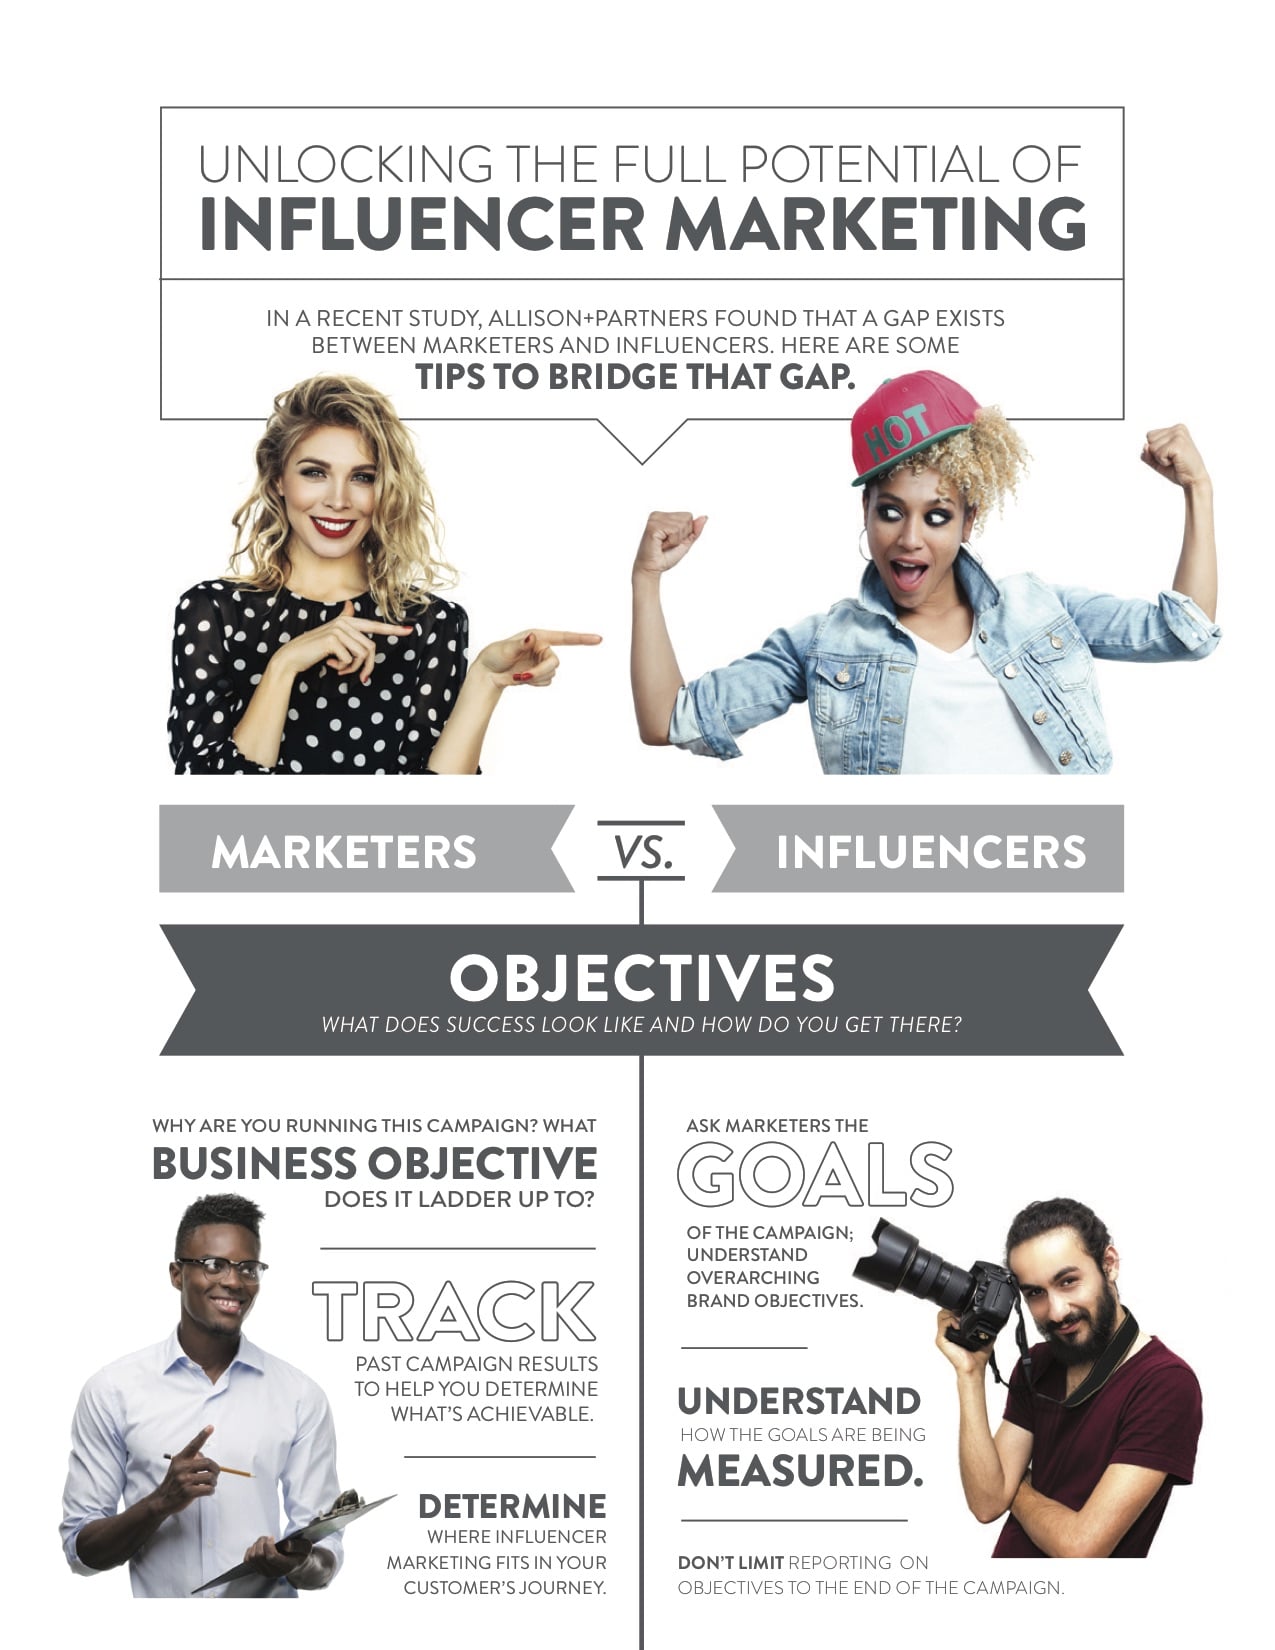 The Influencer Divide—why improving the marketer/influencer relationship is a must